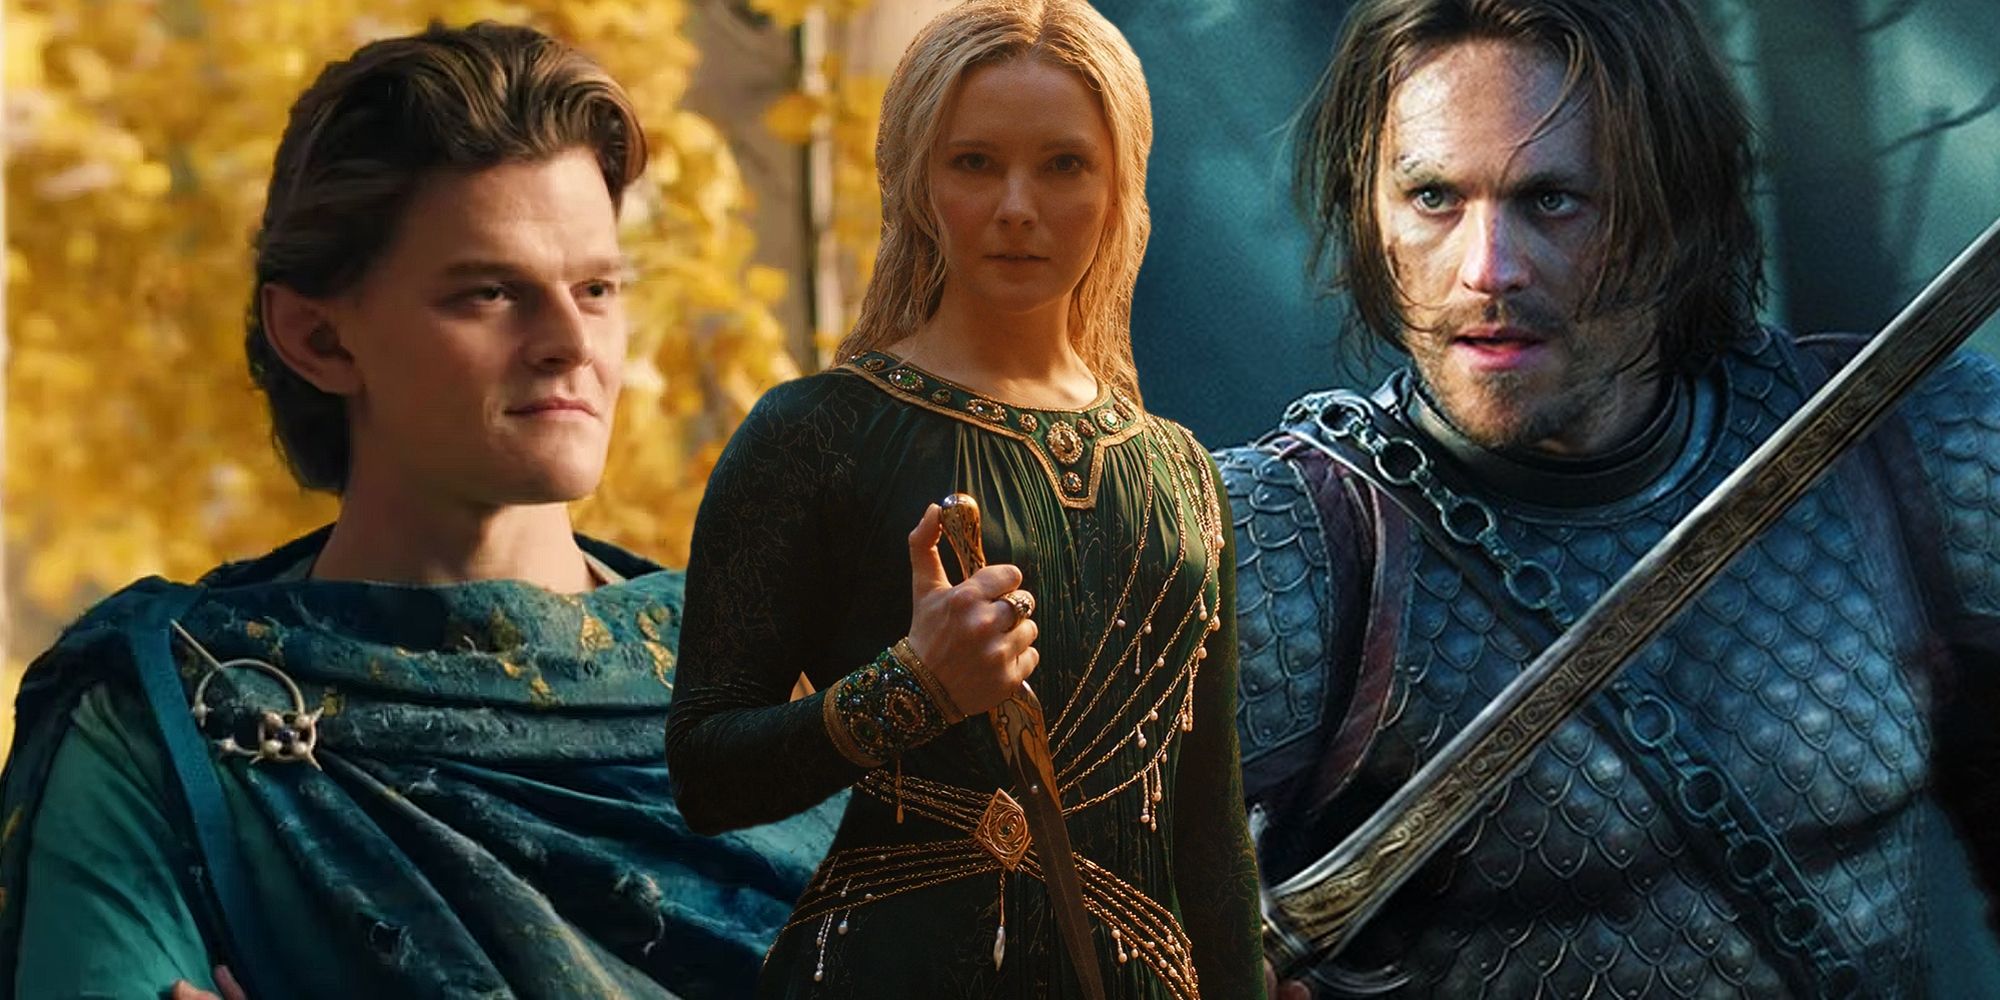 Galadriel, Elrond, and Sauron disguised as Halbrand in Lord of the Rings: Rings of Power